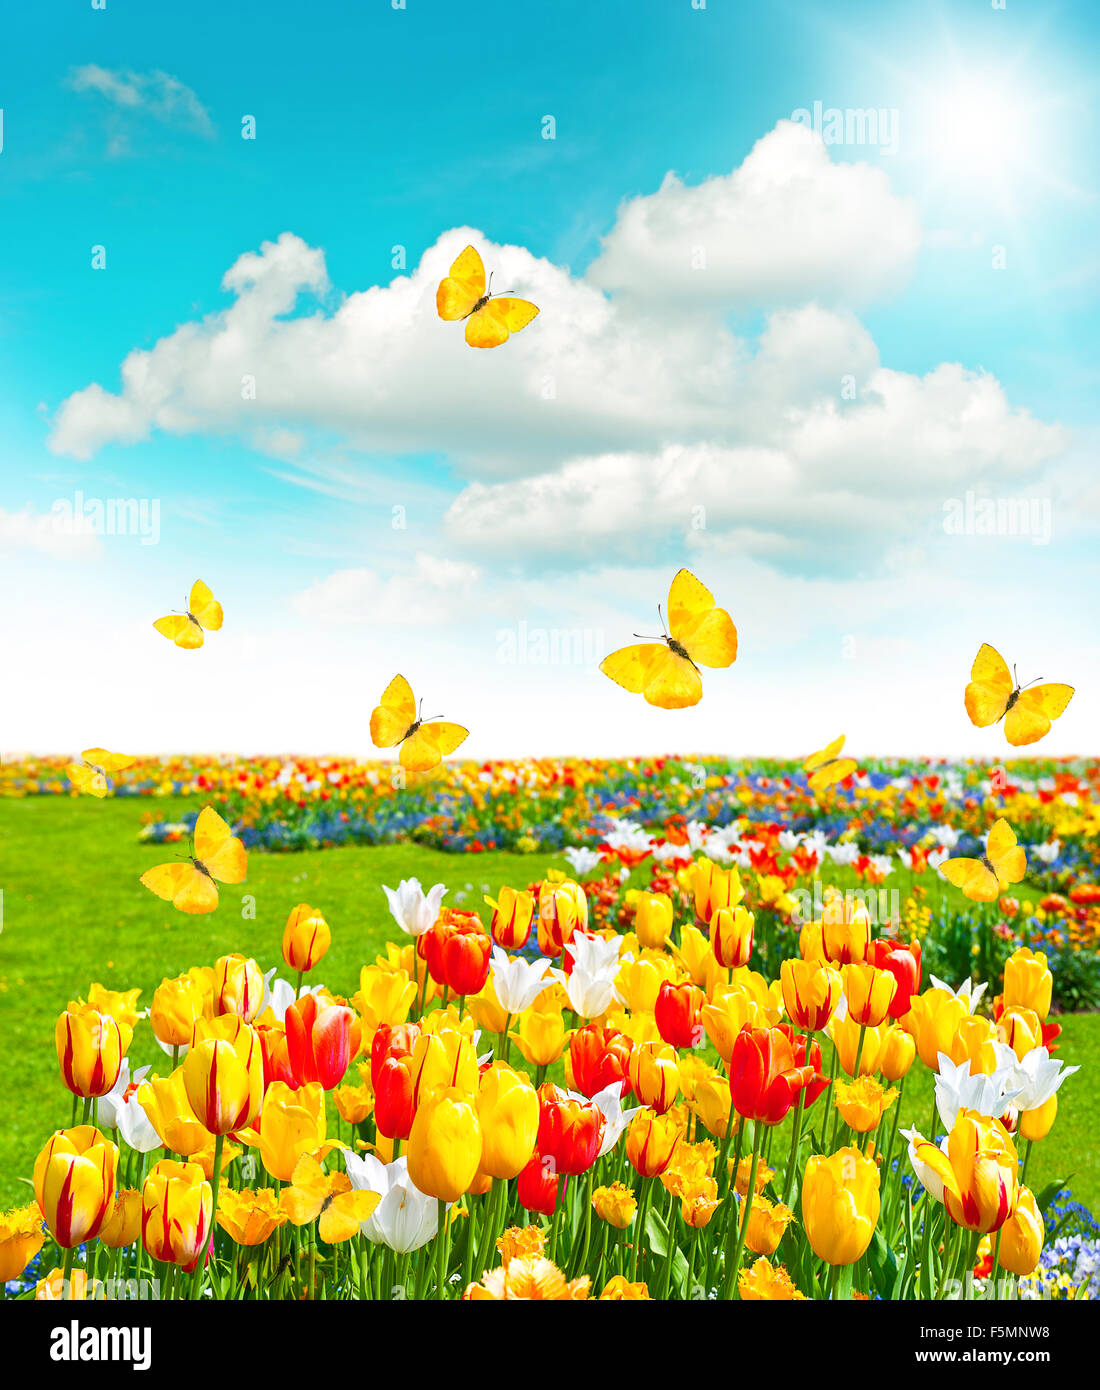 Flowers in green grass. Spring landscape with butterflies and sunny blue sky Stock Photo